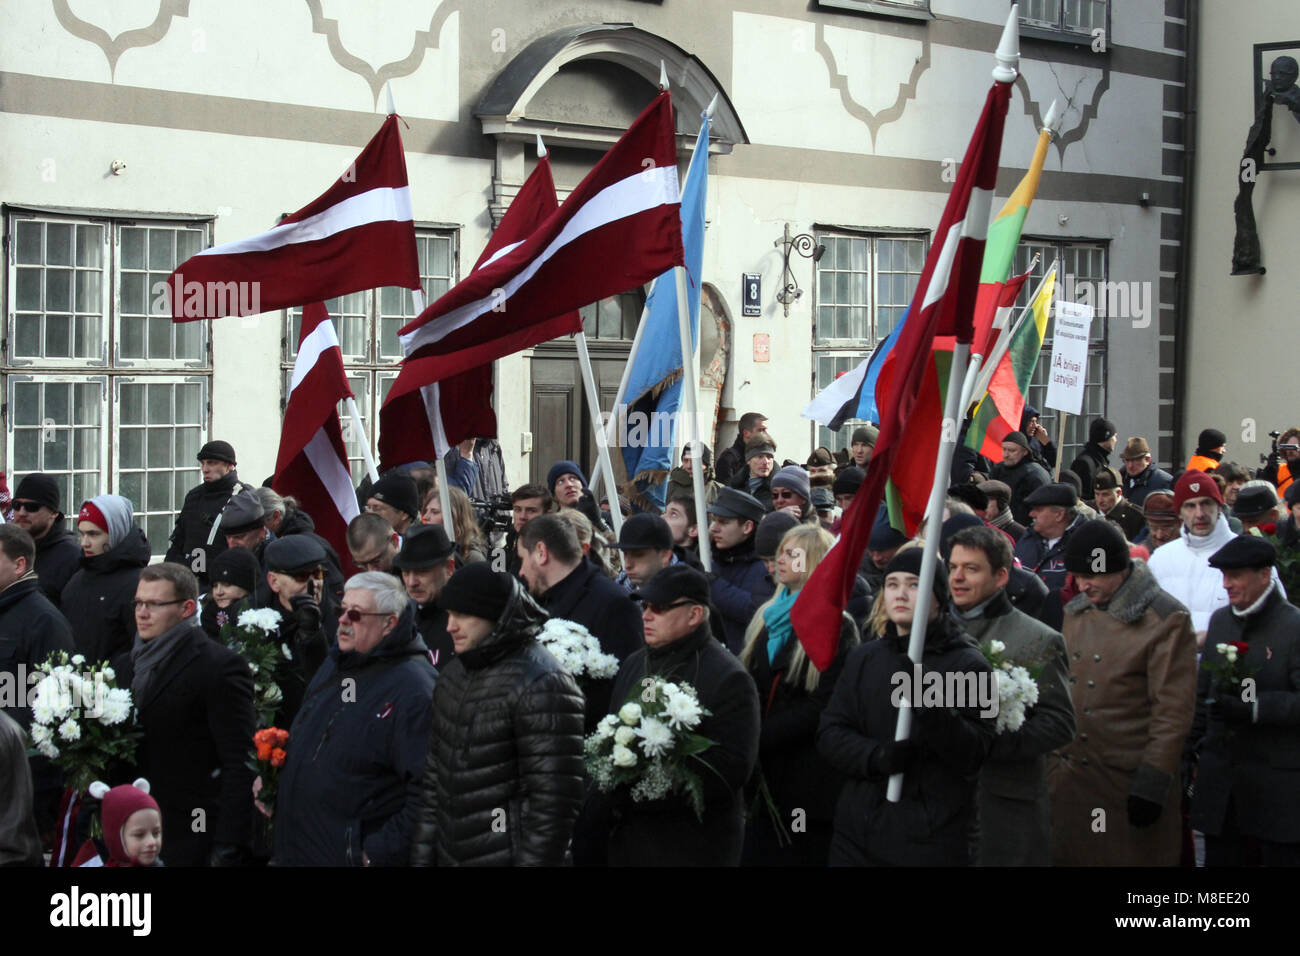 16 March 2018, Latvia, Riga: People marching with Latvian flags through the inner city during a commemoration march for Latvian Waffen-SS veterans in Riga. Latvian veterans of a unit of the Waffen-SS have commemorated their fallen comrades with the controversial march. On Friday about 1500 participants in the war and sympathisers marched through the capital of the Baltic EU and NATO country with massive police protection. Photo: Alexander Welscher/dpa Stock Photo